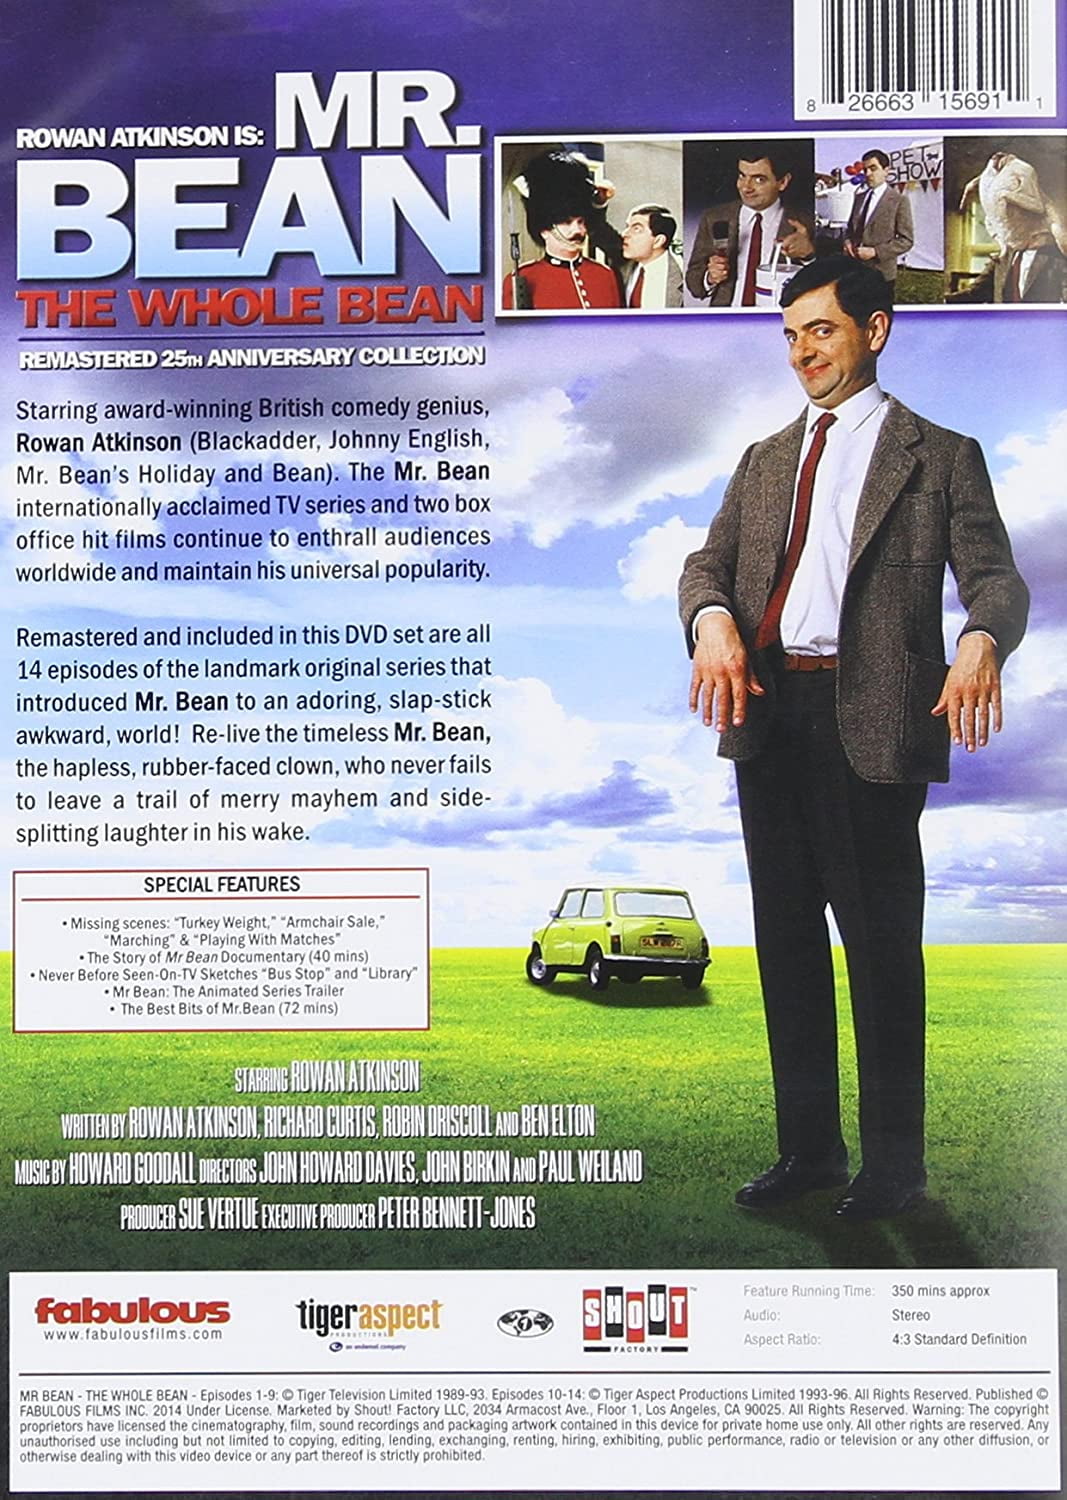 Mr. Bean: The Whole Bean (Remastered 25th Anniversary Collection) (DVD)